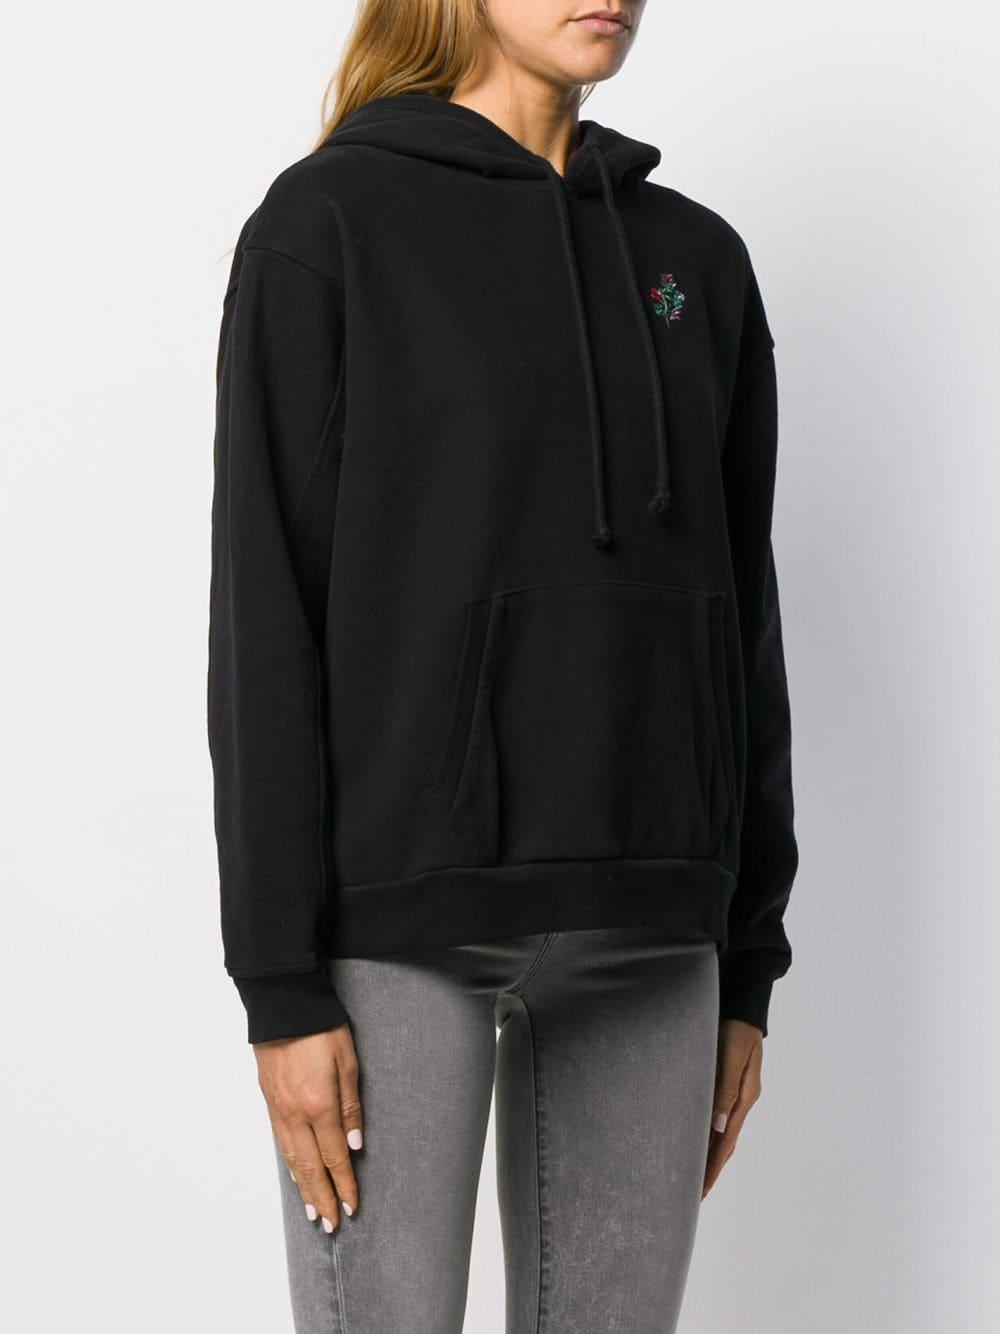 Levi's Cotton Floral Embroidered Hoodie in Black | Lyst